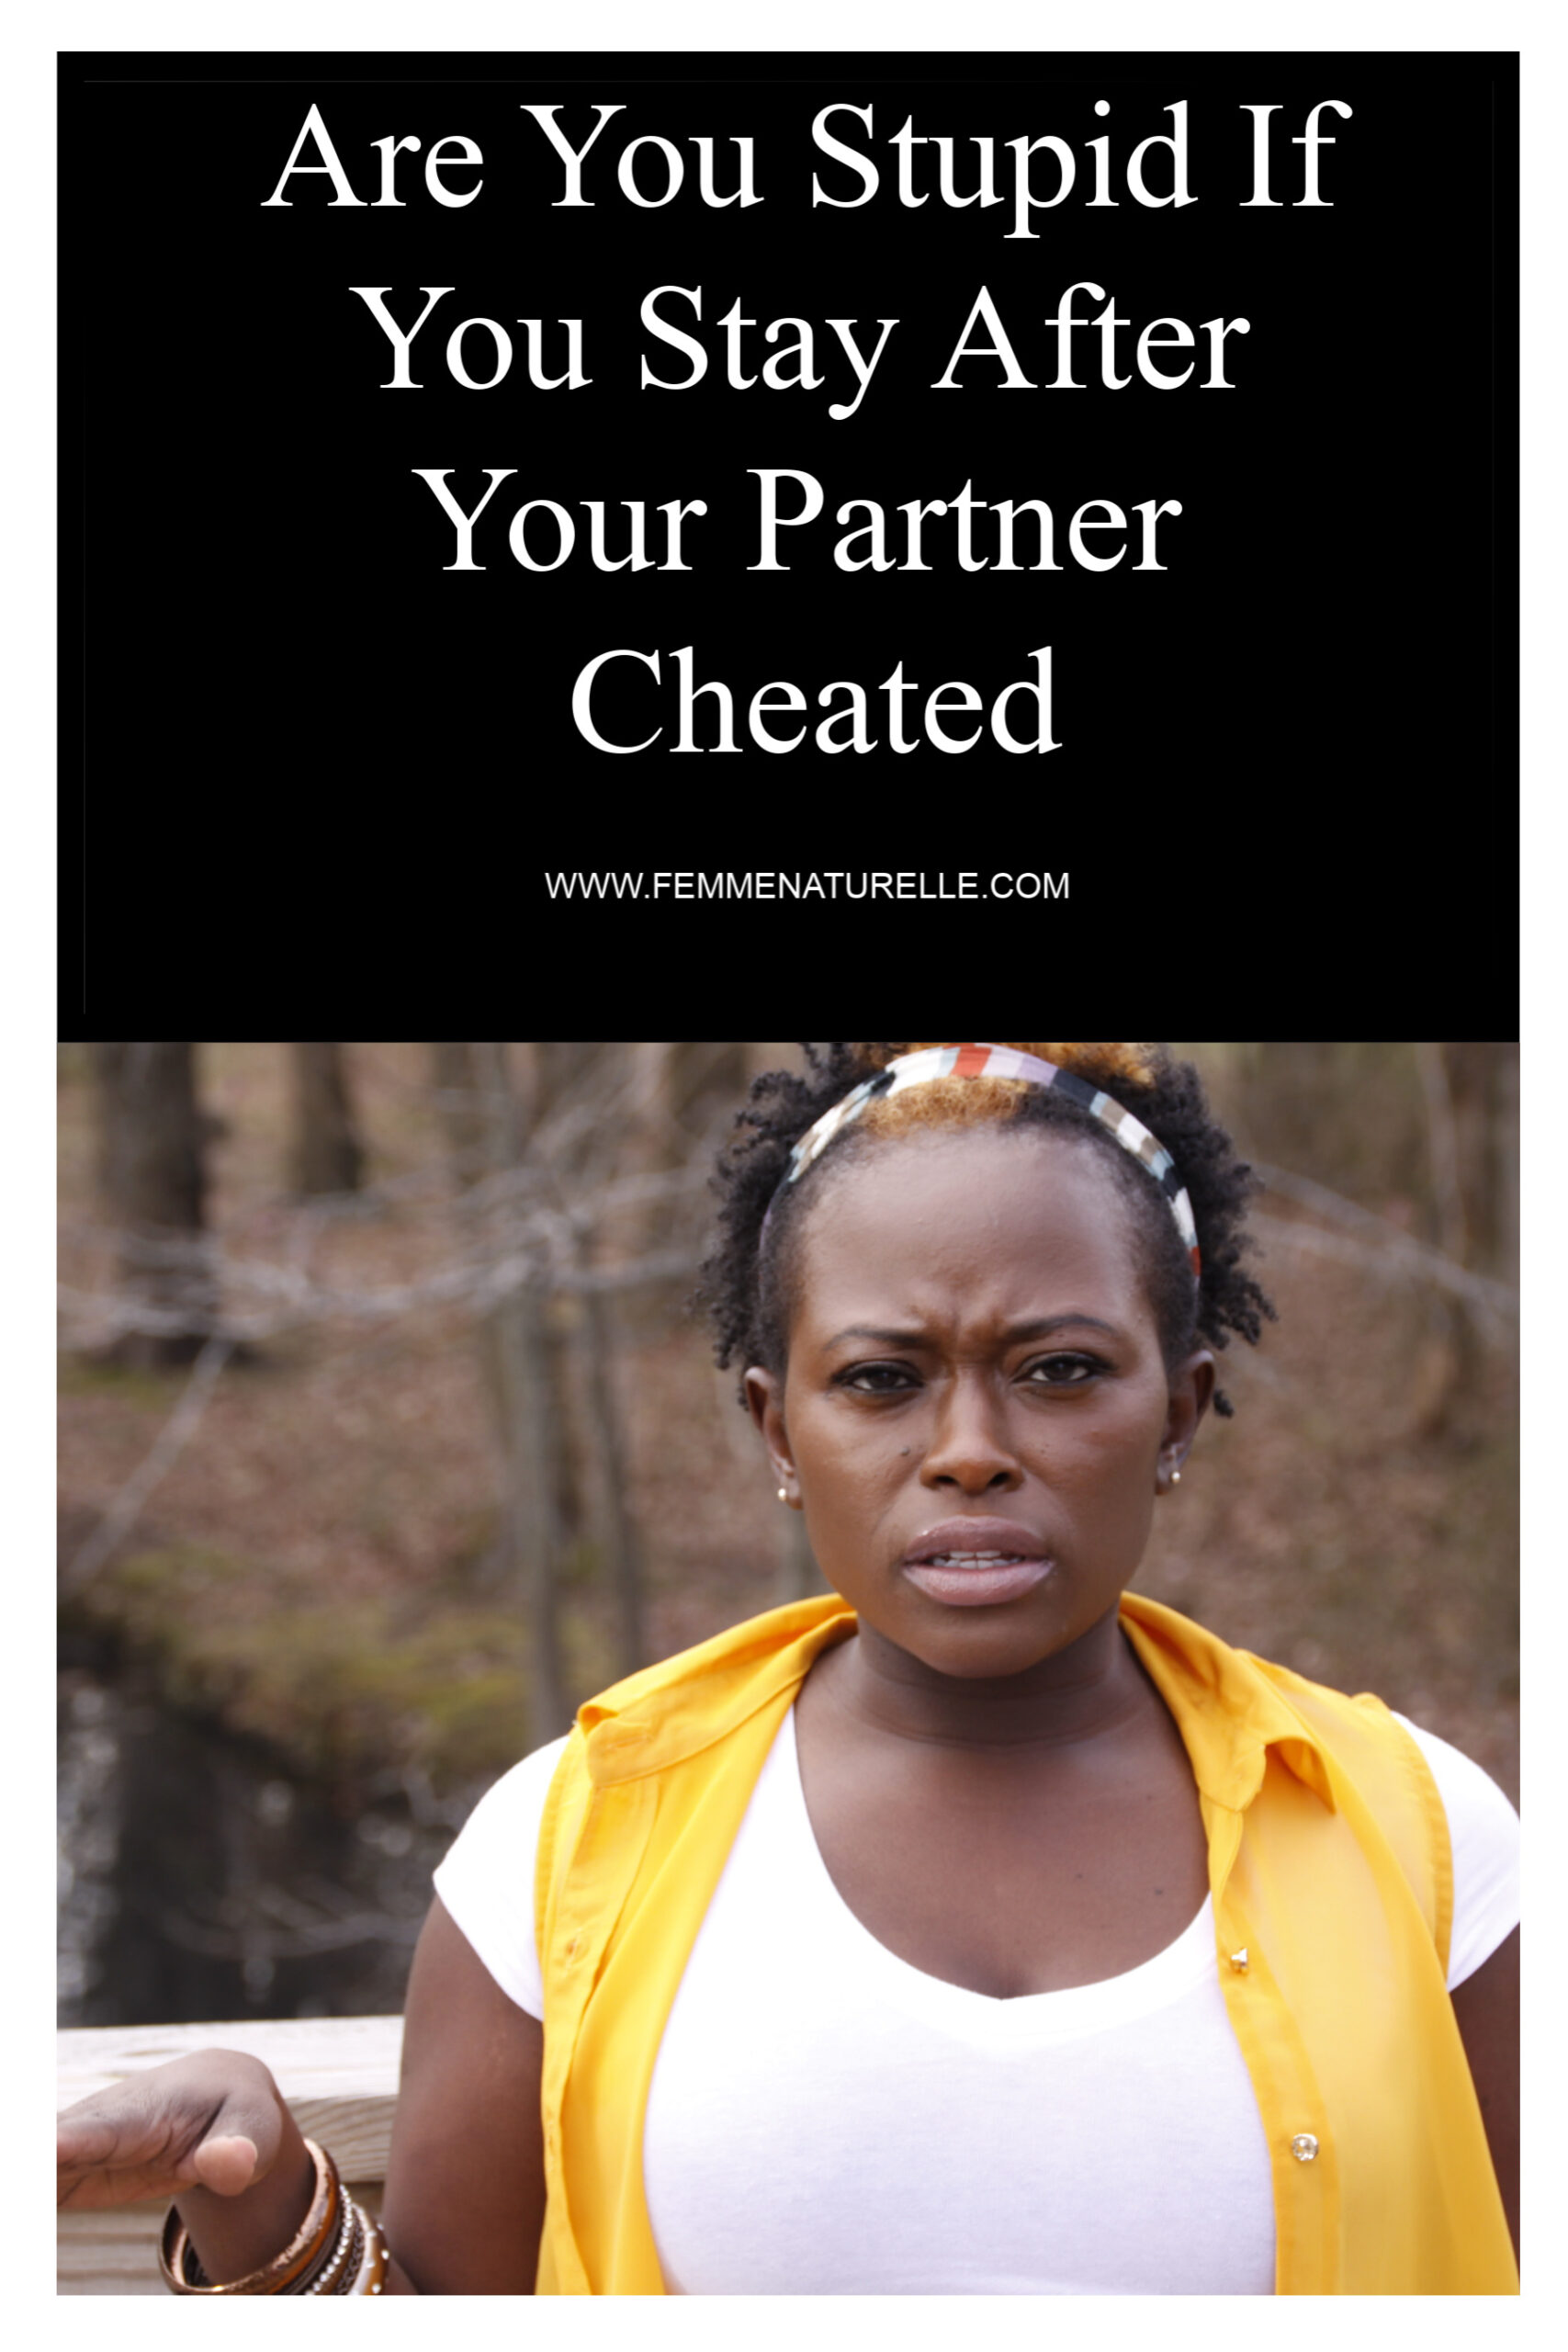 Are You Stupid If You Stay After Your Partner Cheated